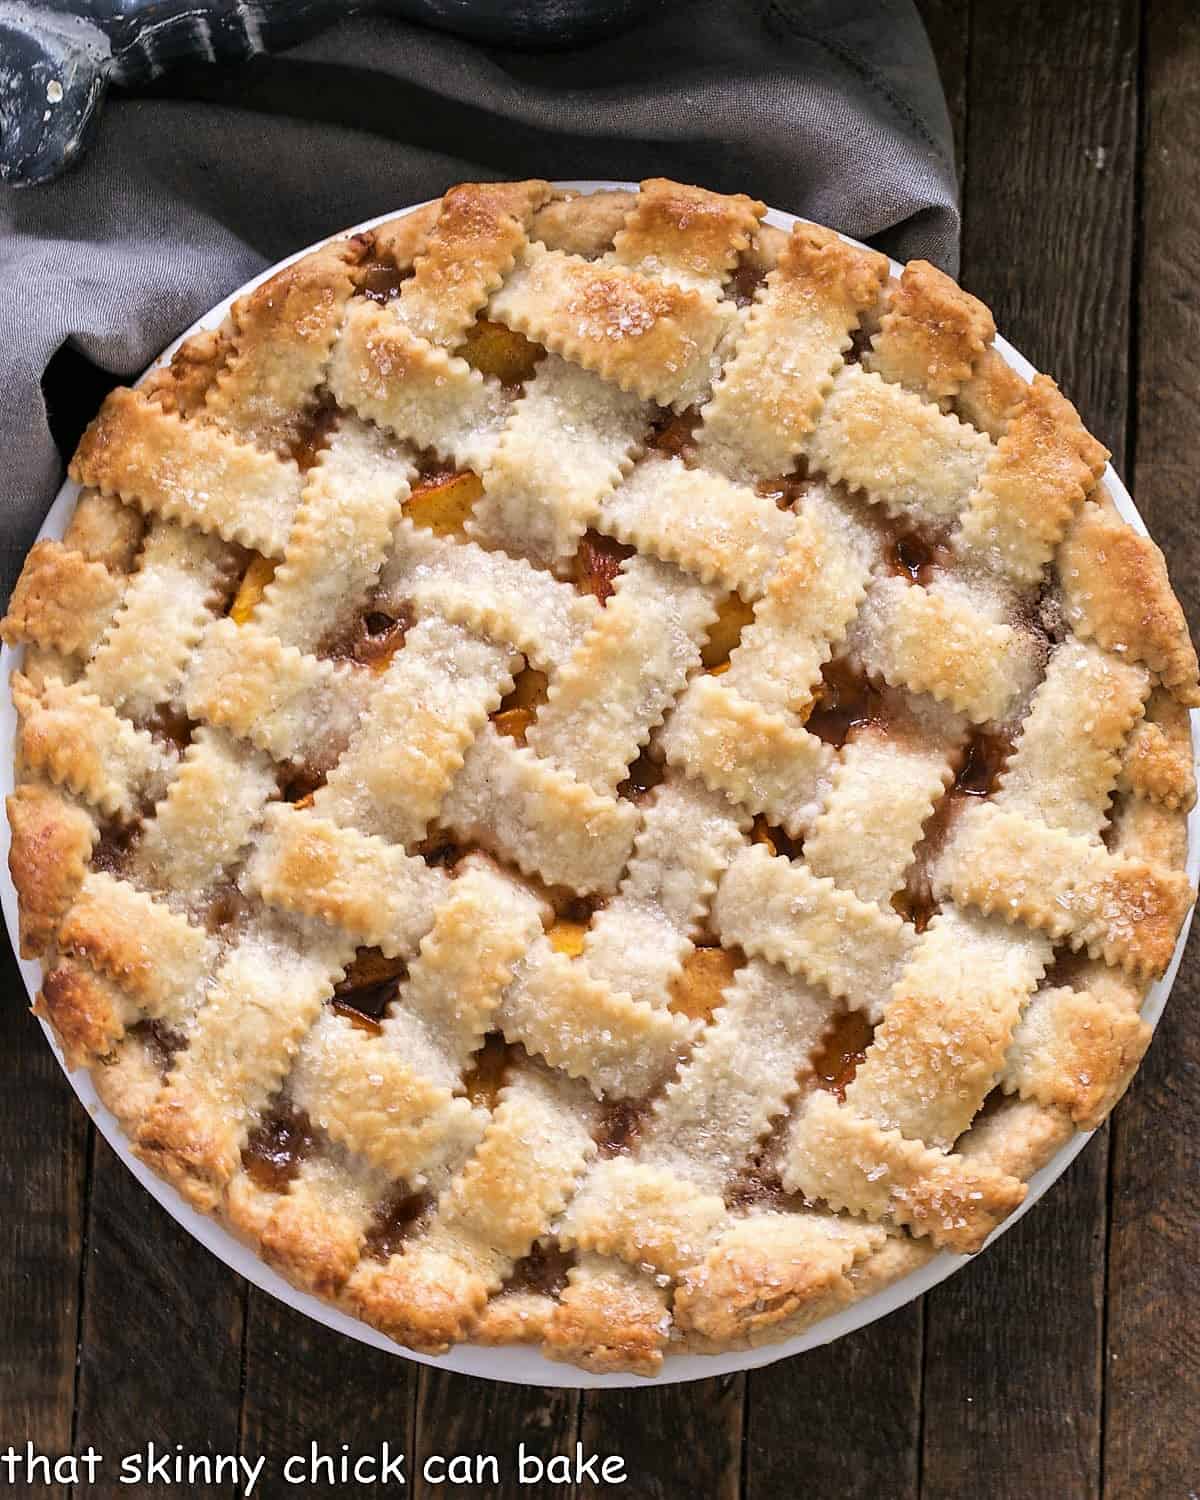 Overhead view of a Classic Peach Pie with a lattice crust.